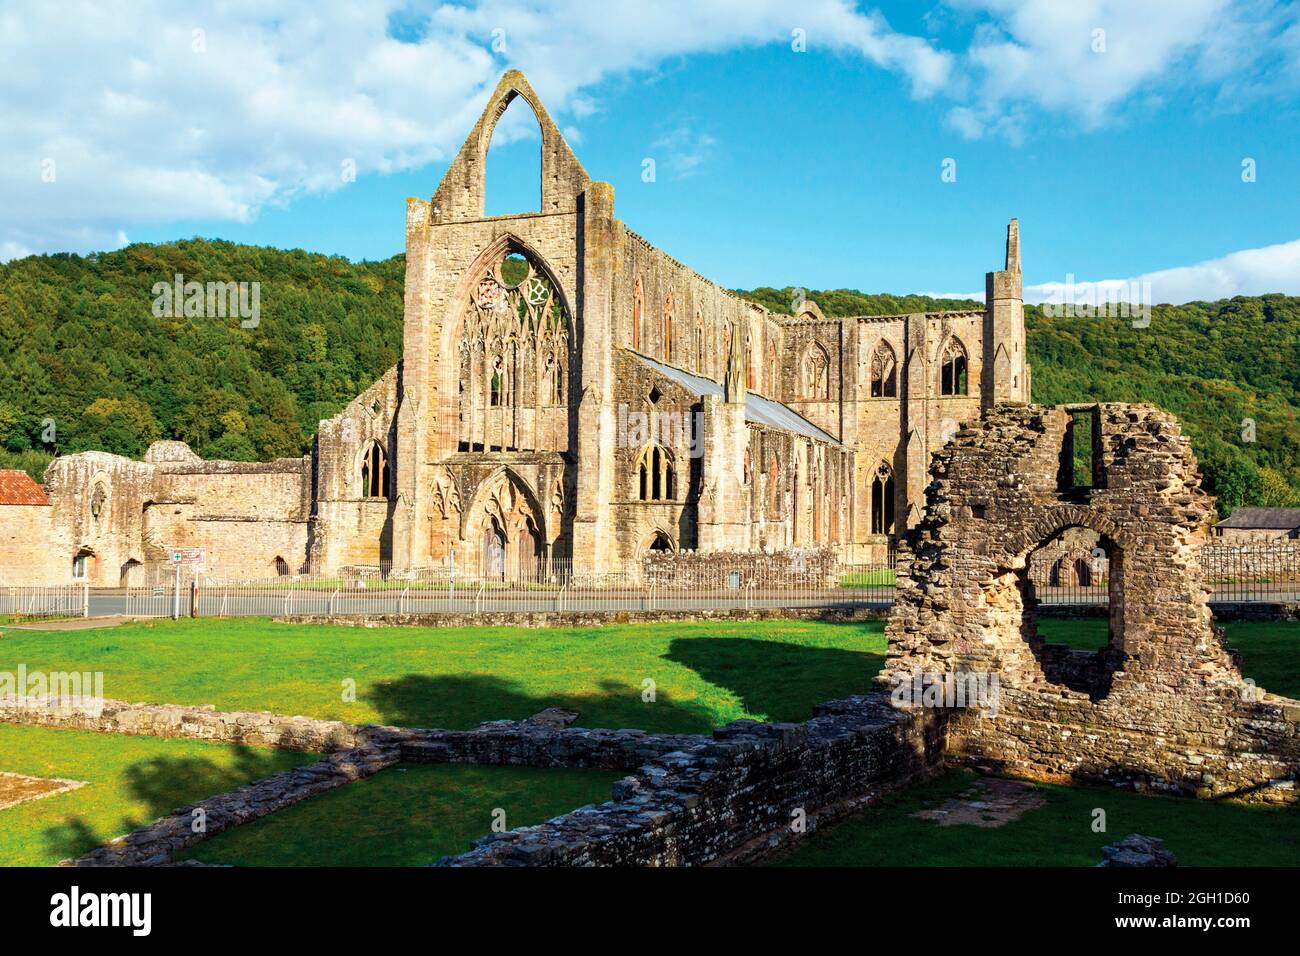 Tintern Abbey, Monmouthshire, Wales, United Kingdom. The abbey was founded in 1131. Stock Photo